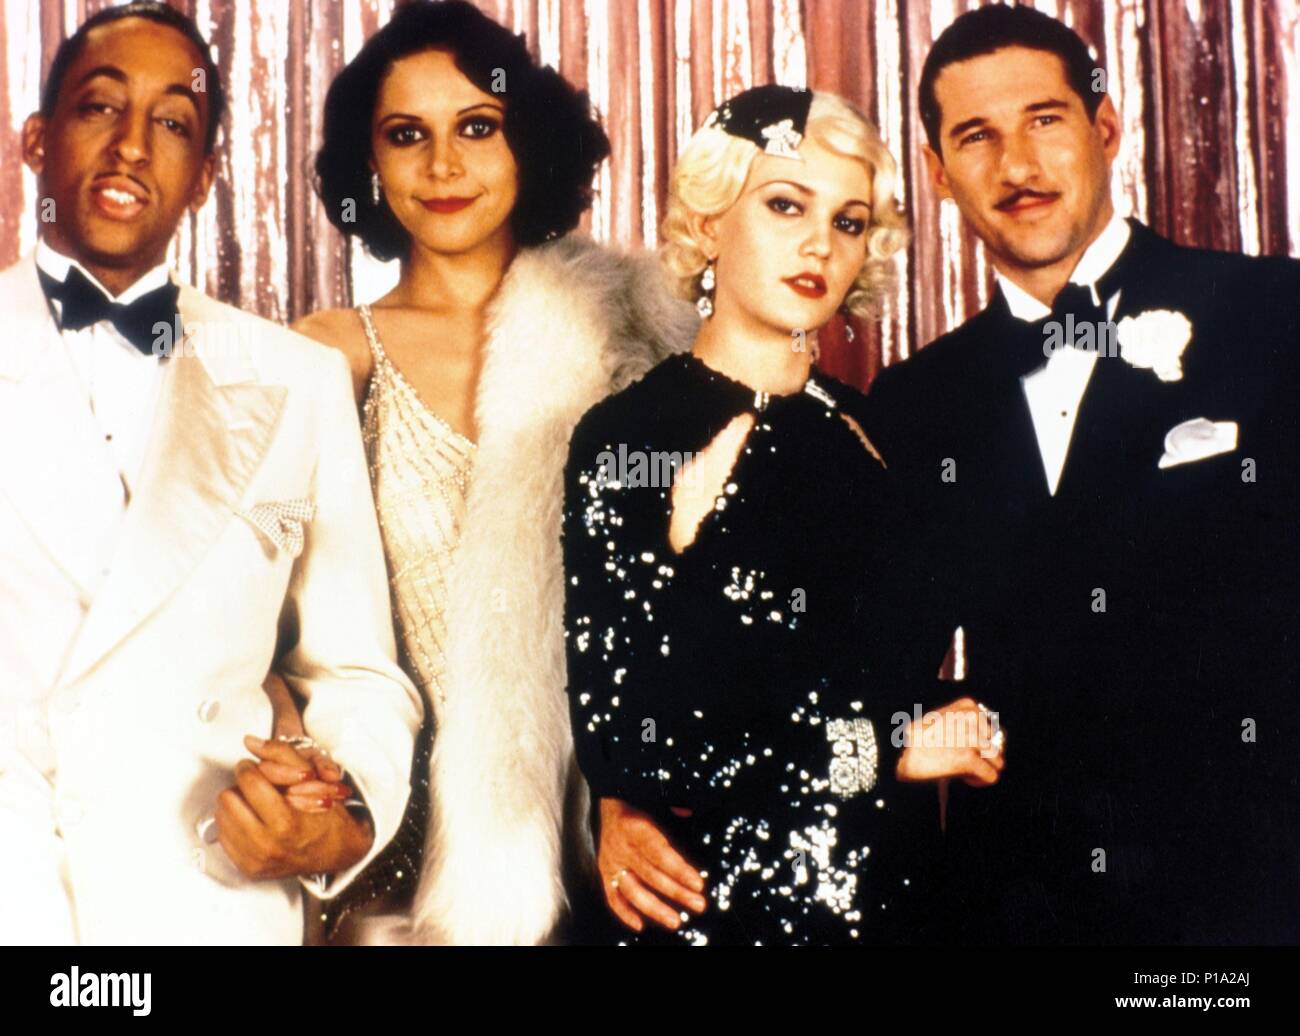 Original Film Title: THE COTTON CLUB.  English Title: THE COTTON CLUB.  Film Director: FRANCIS FORD COPPOLA.  Year: 1984.  Stars: RICHARD GERE; DIANE LANE; LONETTE MCKEE; GREGORY HINES. Credit: ZOETROPE/ORION / Album Stock Photo